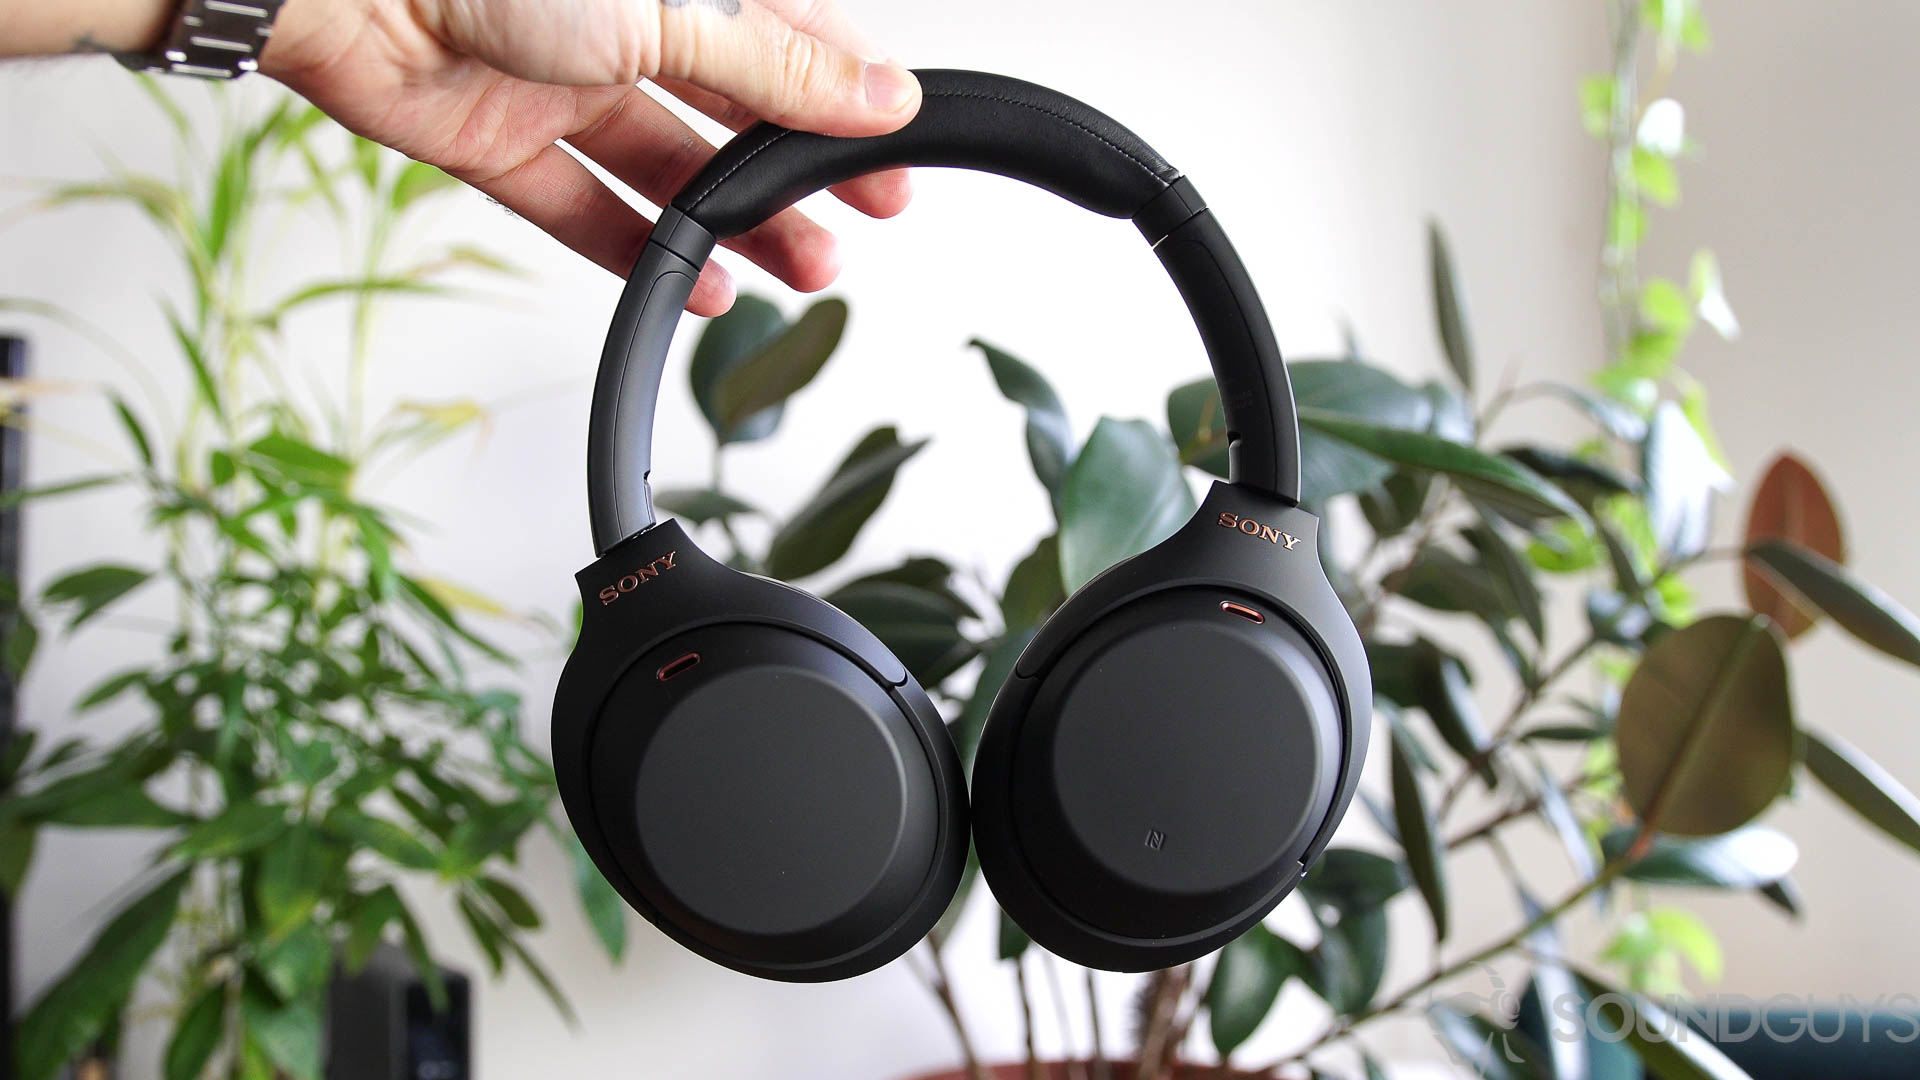 A photo of the Sony WH 1000XM4 noise cancelling headphones held by a man in front of indoor plants.